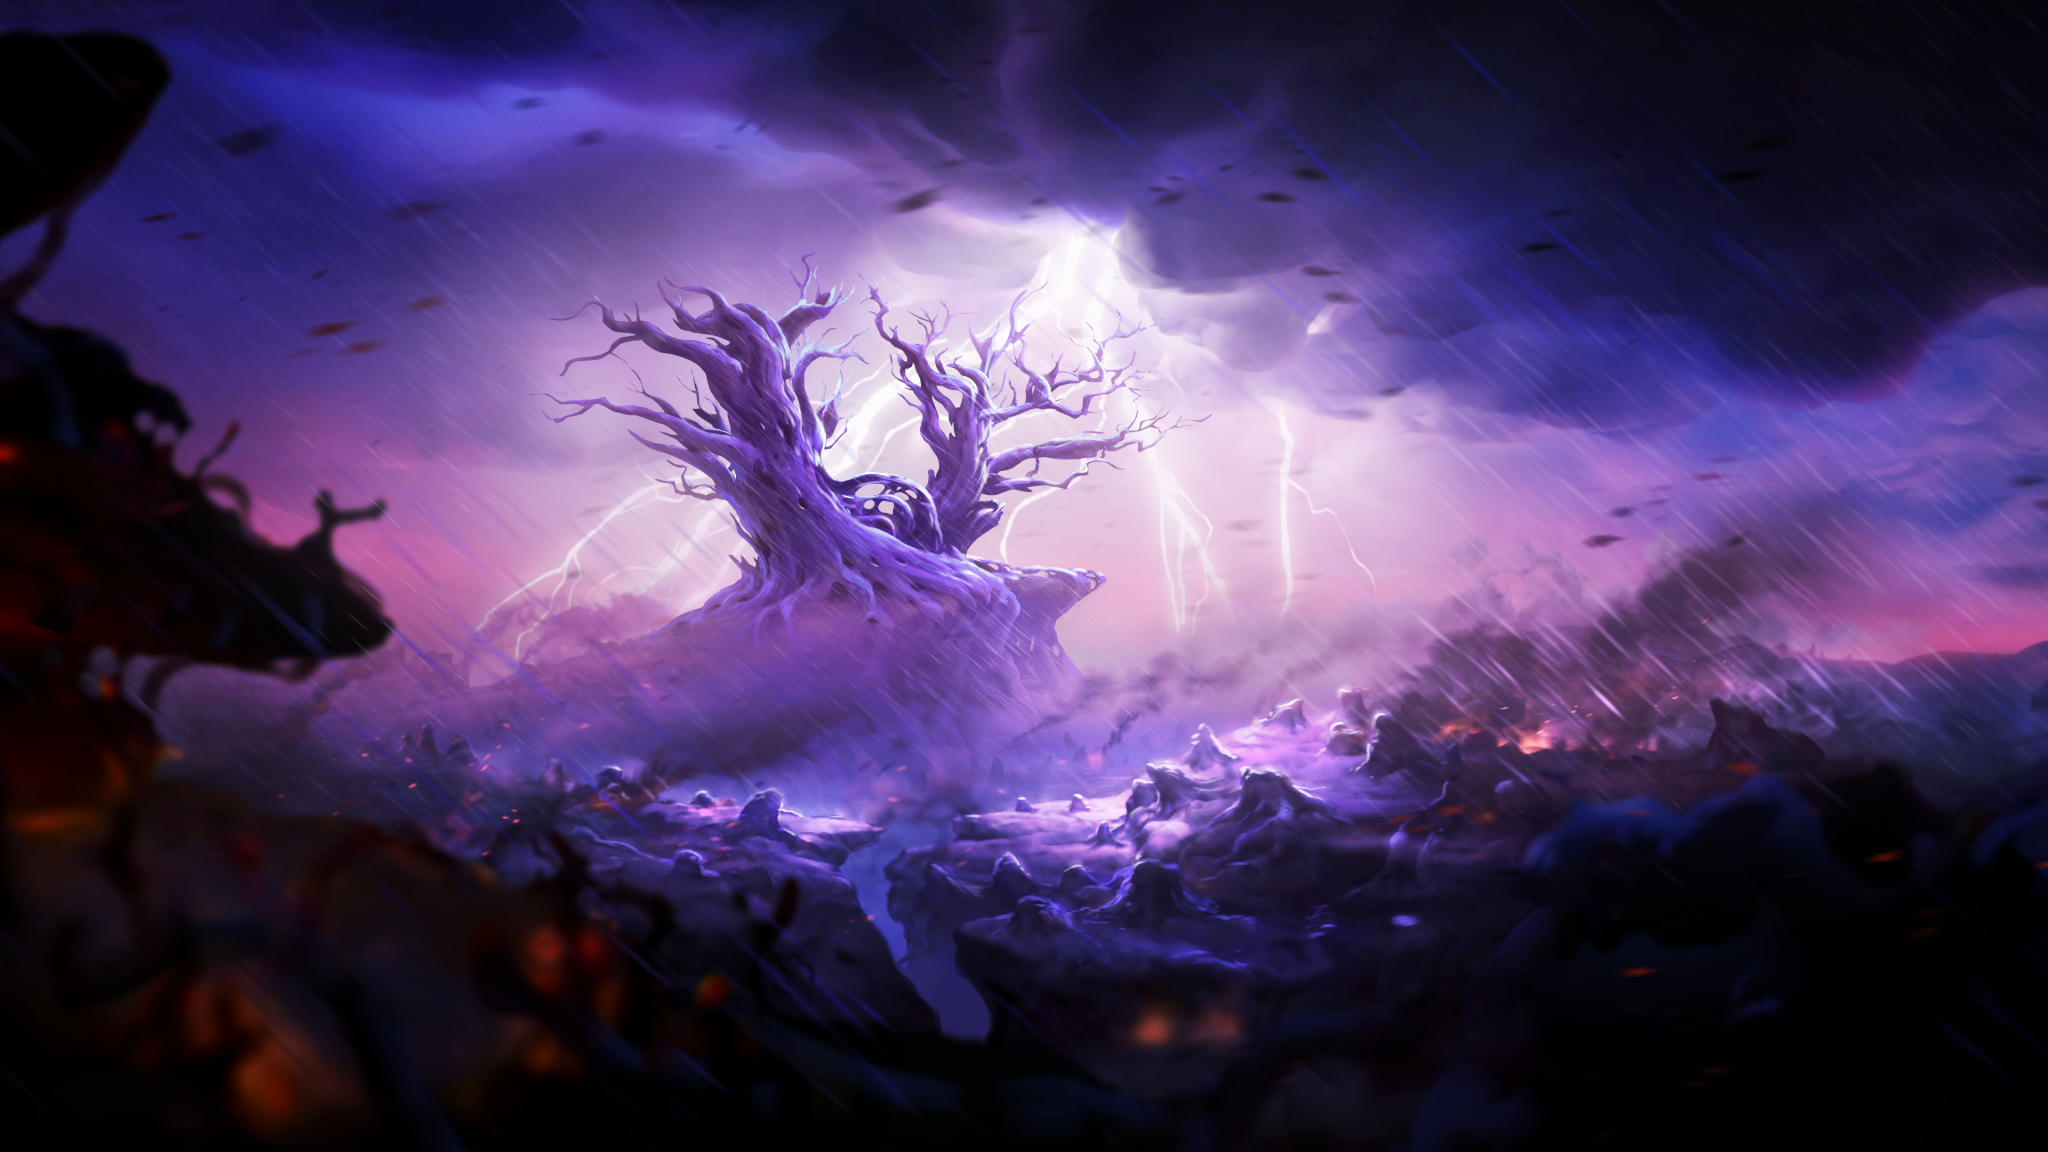 Ori and the Will of the Wisps, Ori and the Will of the Wisps Farm Luce Spirituale, Ori and the Will of the Wisps Wallpaper, Guida Ori and the Will of the Wisps, Ori 2 Xbox One